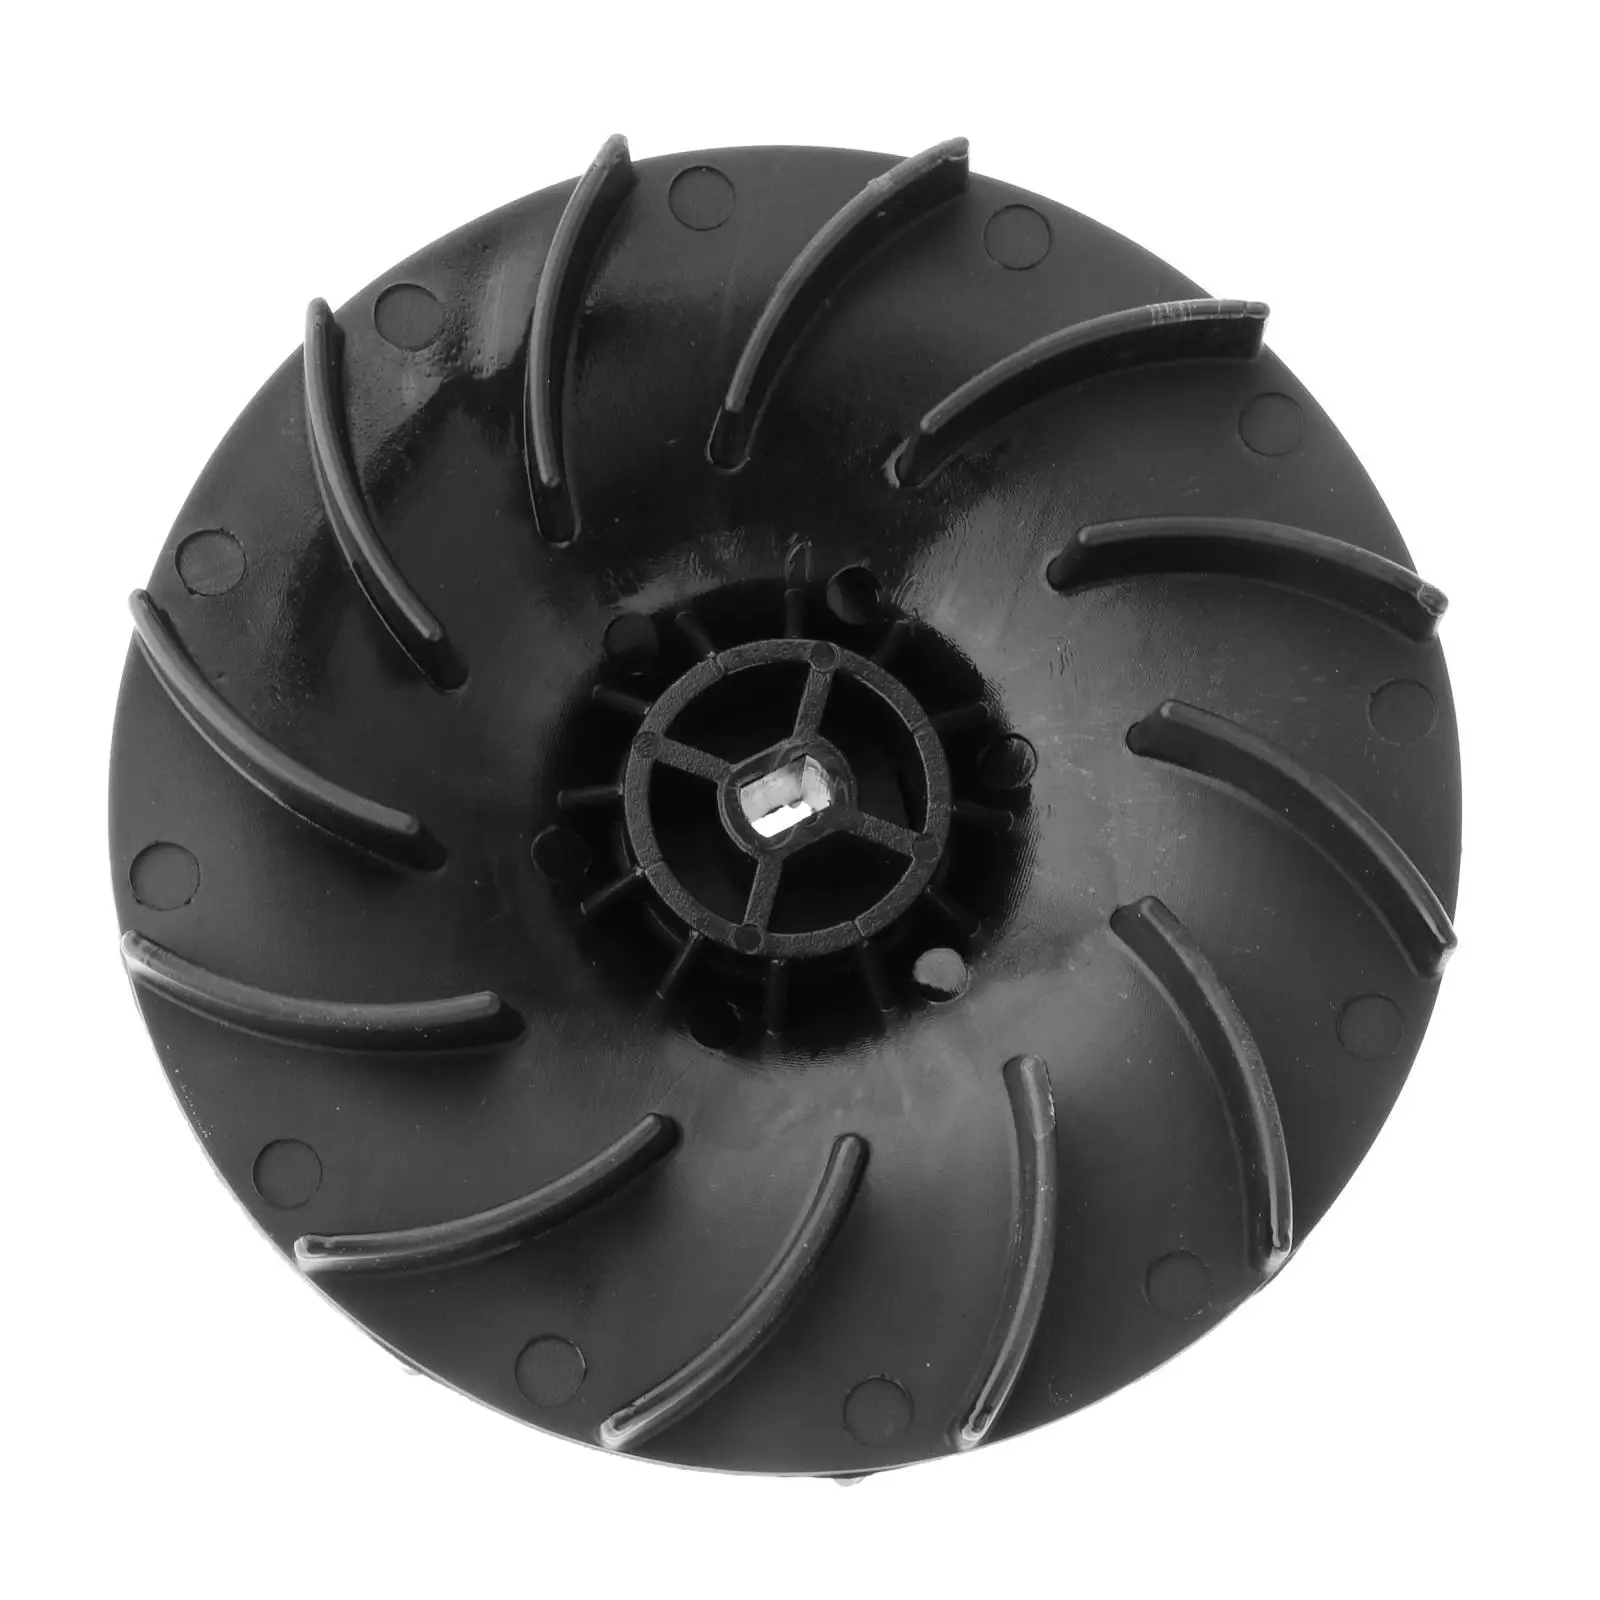   Generic Replace Fit for Electric Blower VAC Impeller Fan